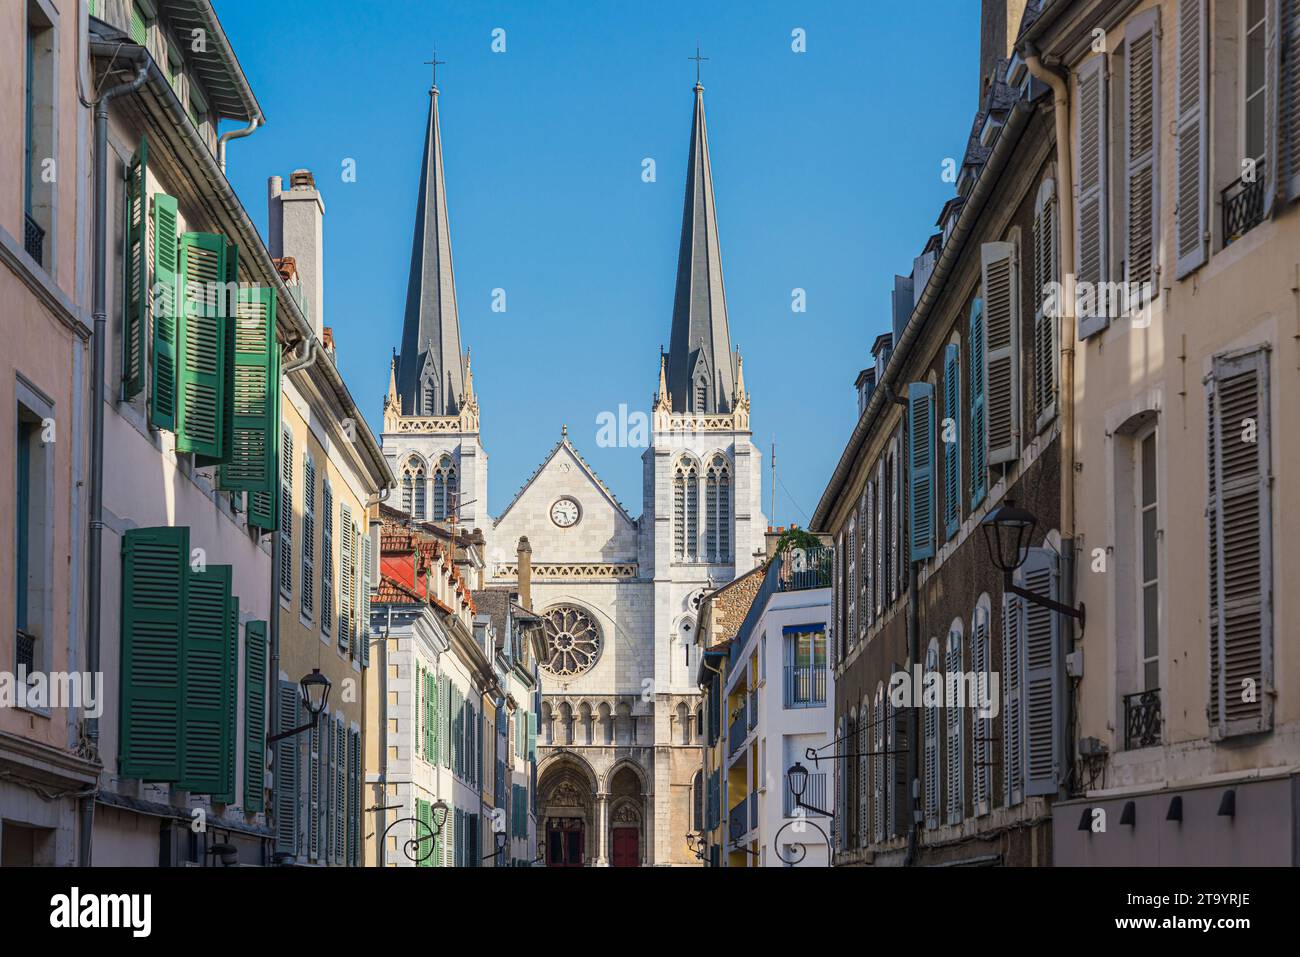 St. James Church, a catholic temple in Pau, a city in France Stock Photo